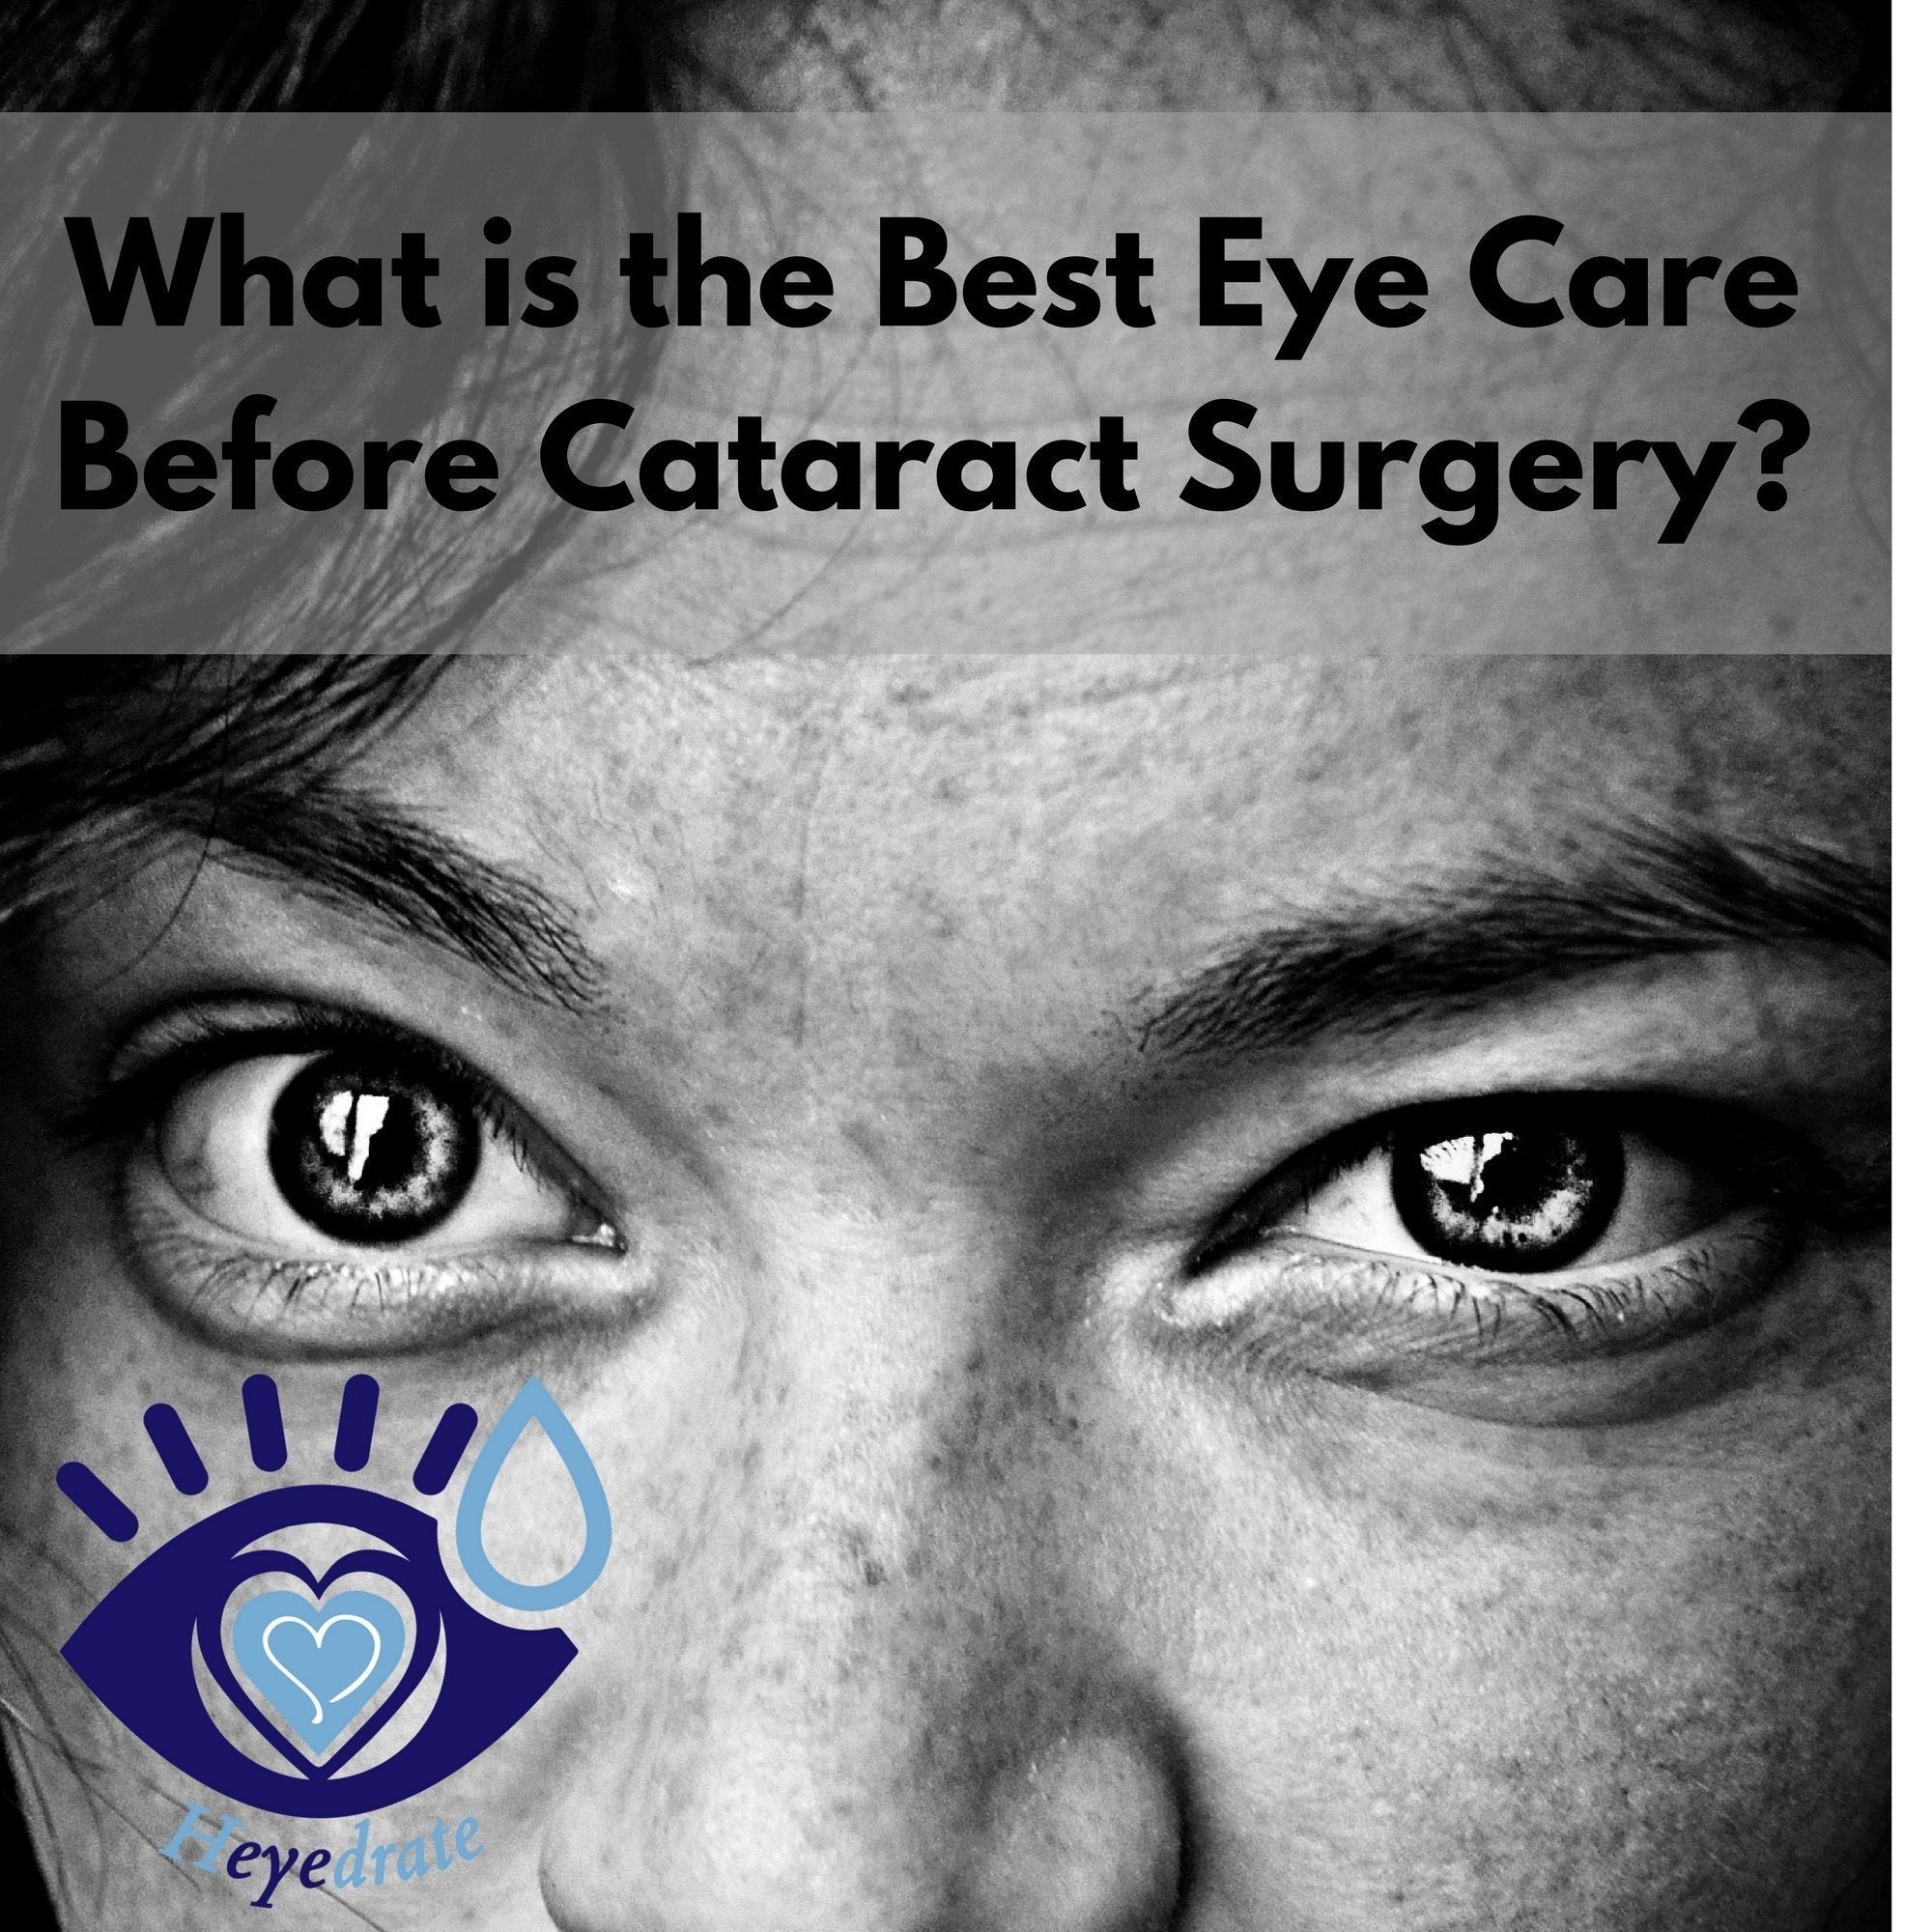 What is the Best Eye Care Before Cataract Surgery?